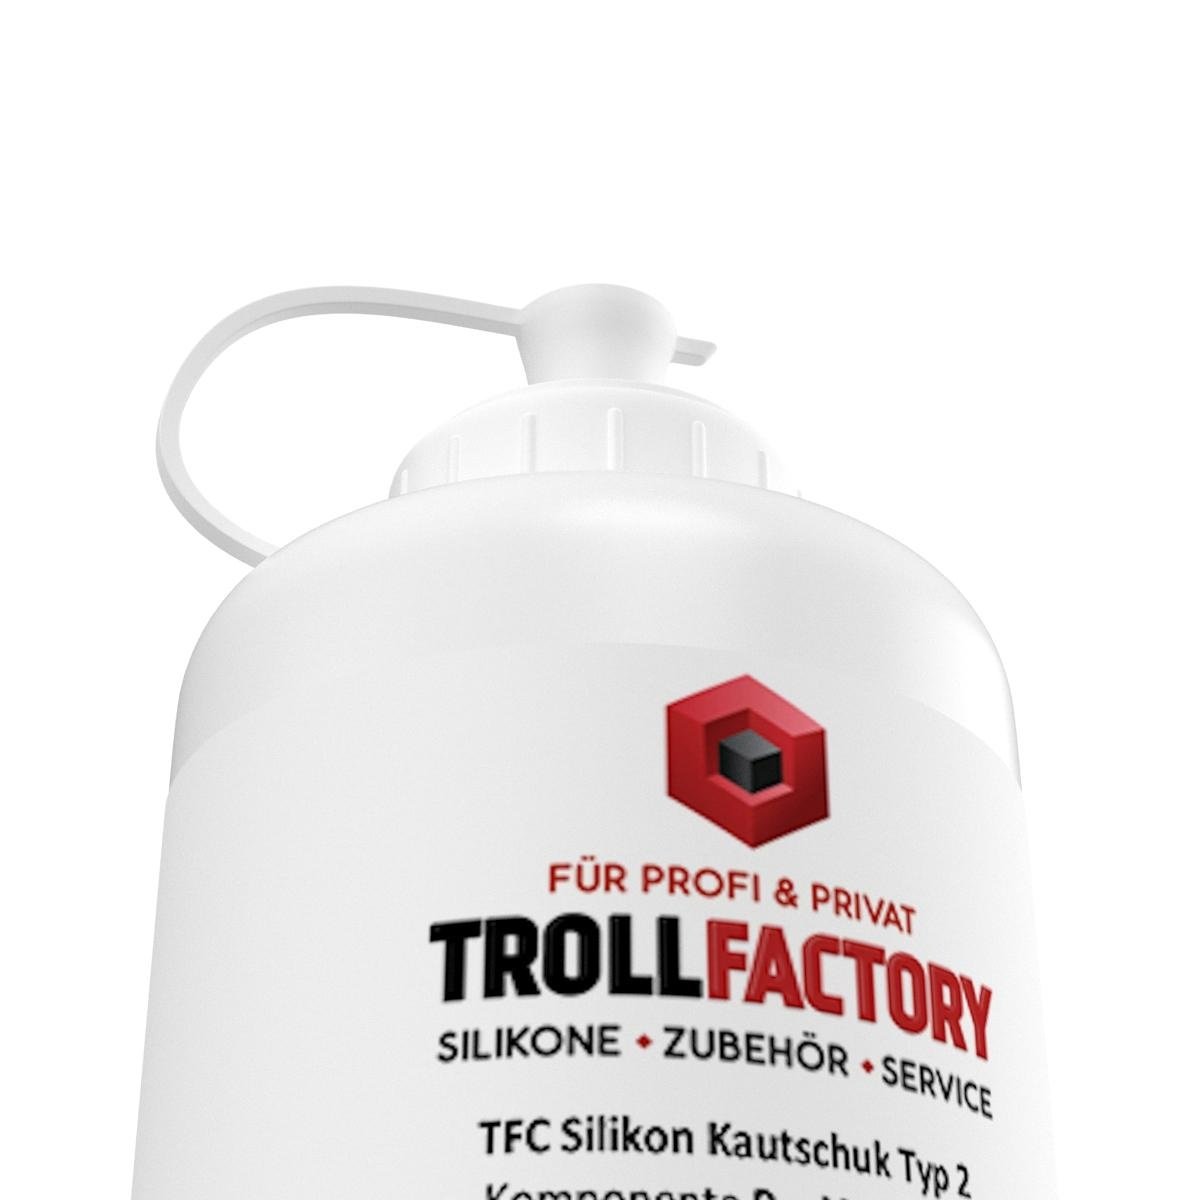 Troll Factory TFC Troll Factory Silicone Rubber type 2 Afvorm silicone 1000g